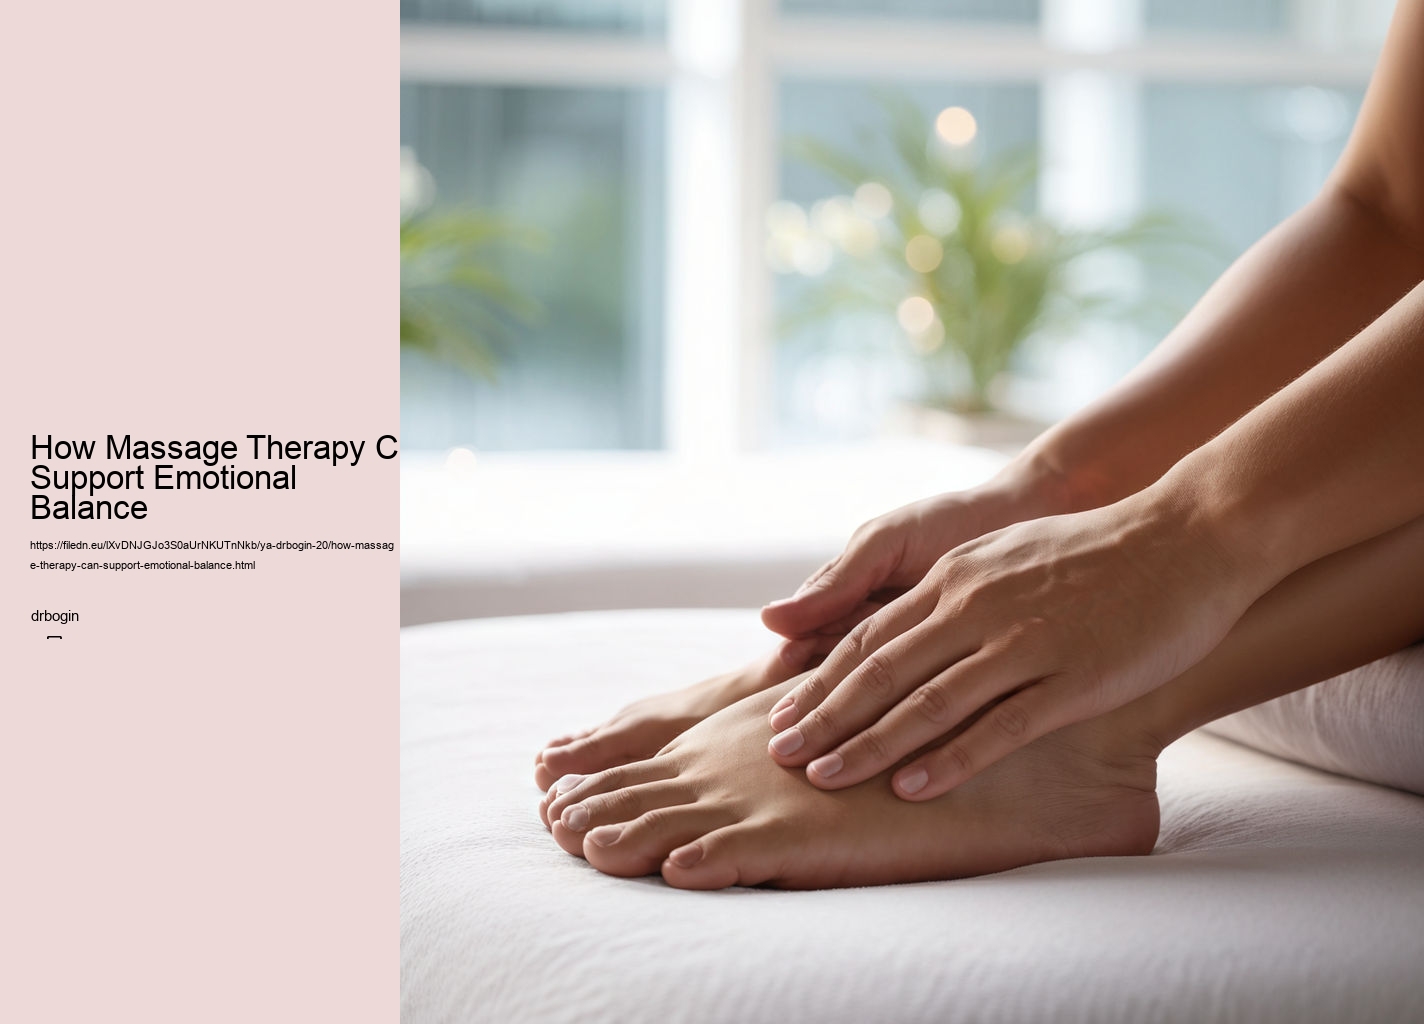 How Massage Therapy Can Support Emotional Balance